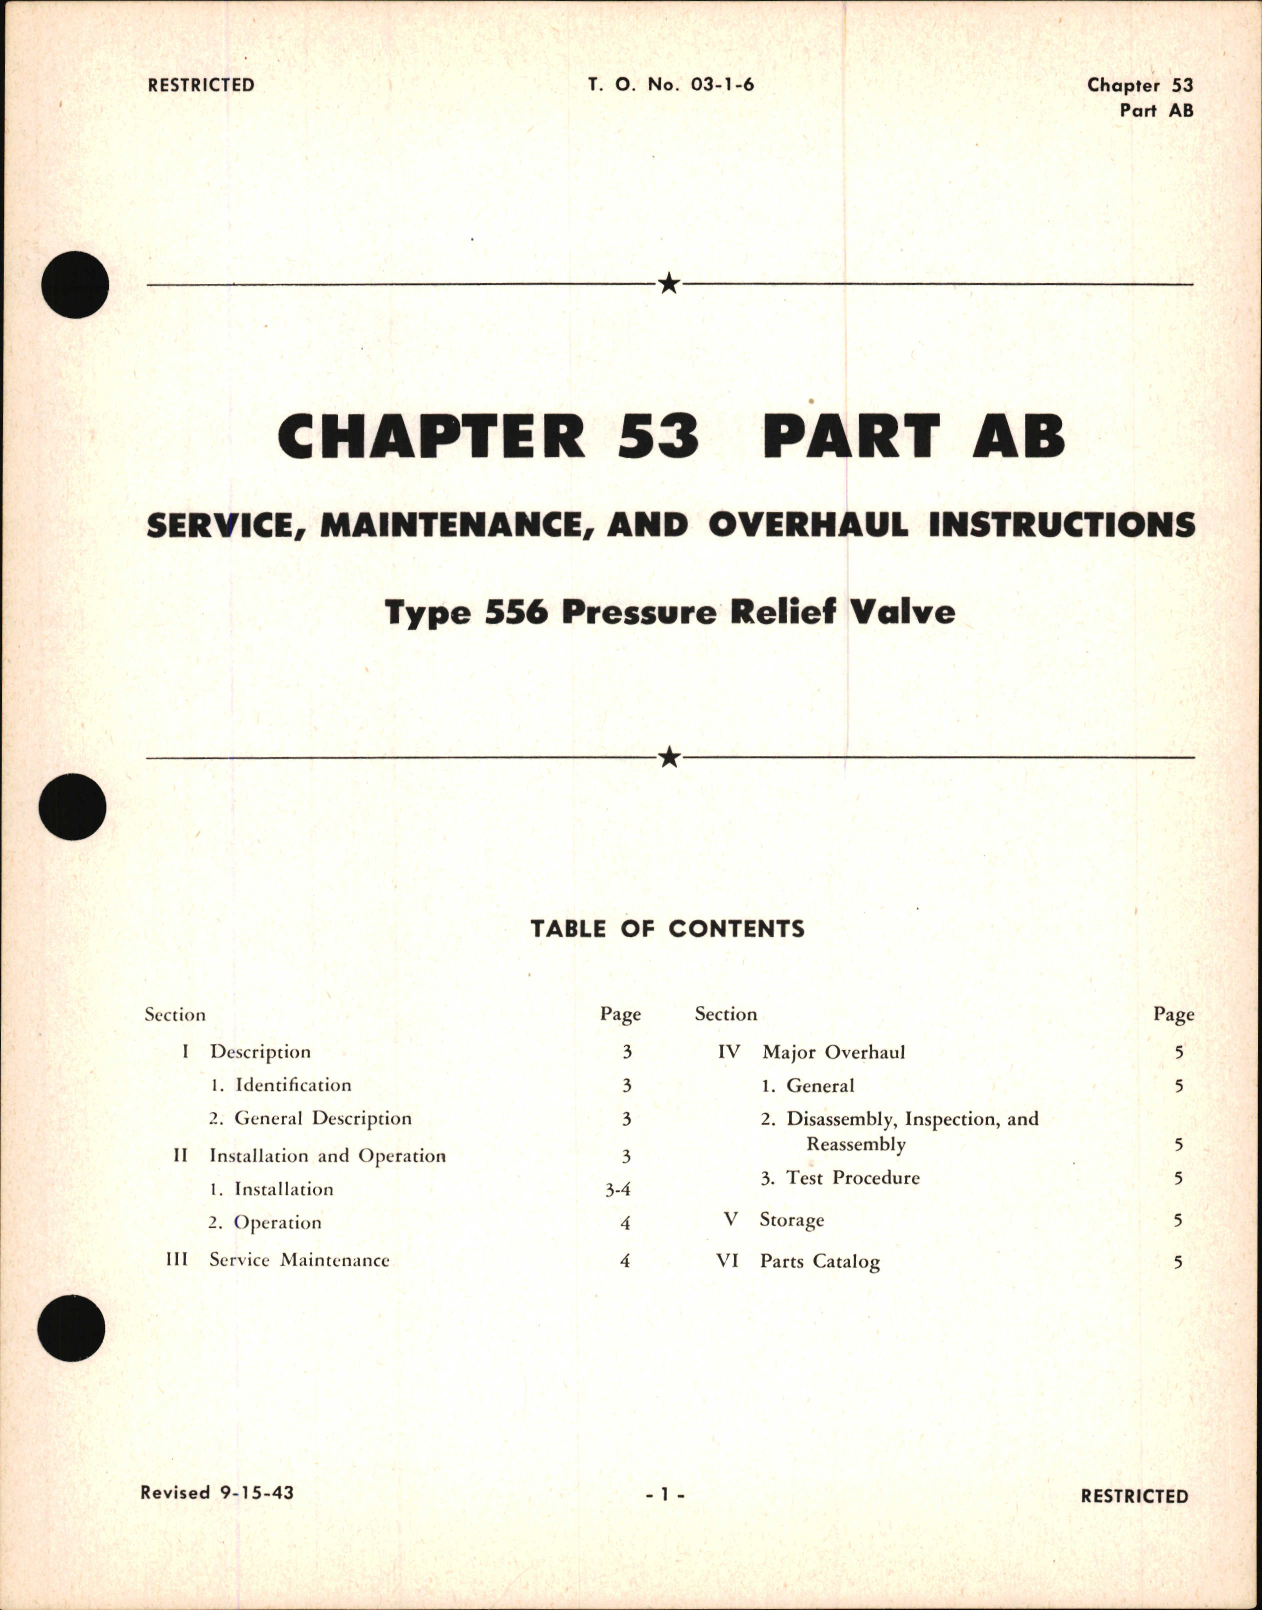 Sample page 1 from AirCorps Library document: Service, Maintenance and Overhaul Instructions for Pressure Relief Valve Type 556, Ch 53 Part AB